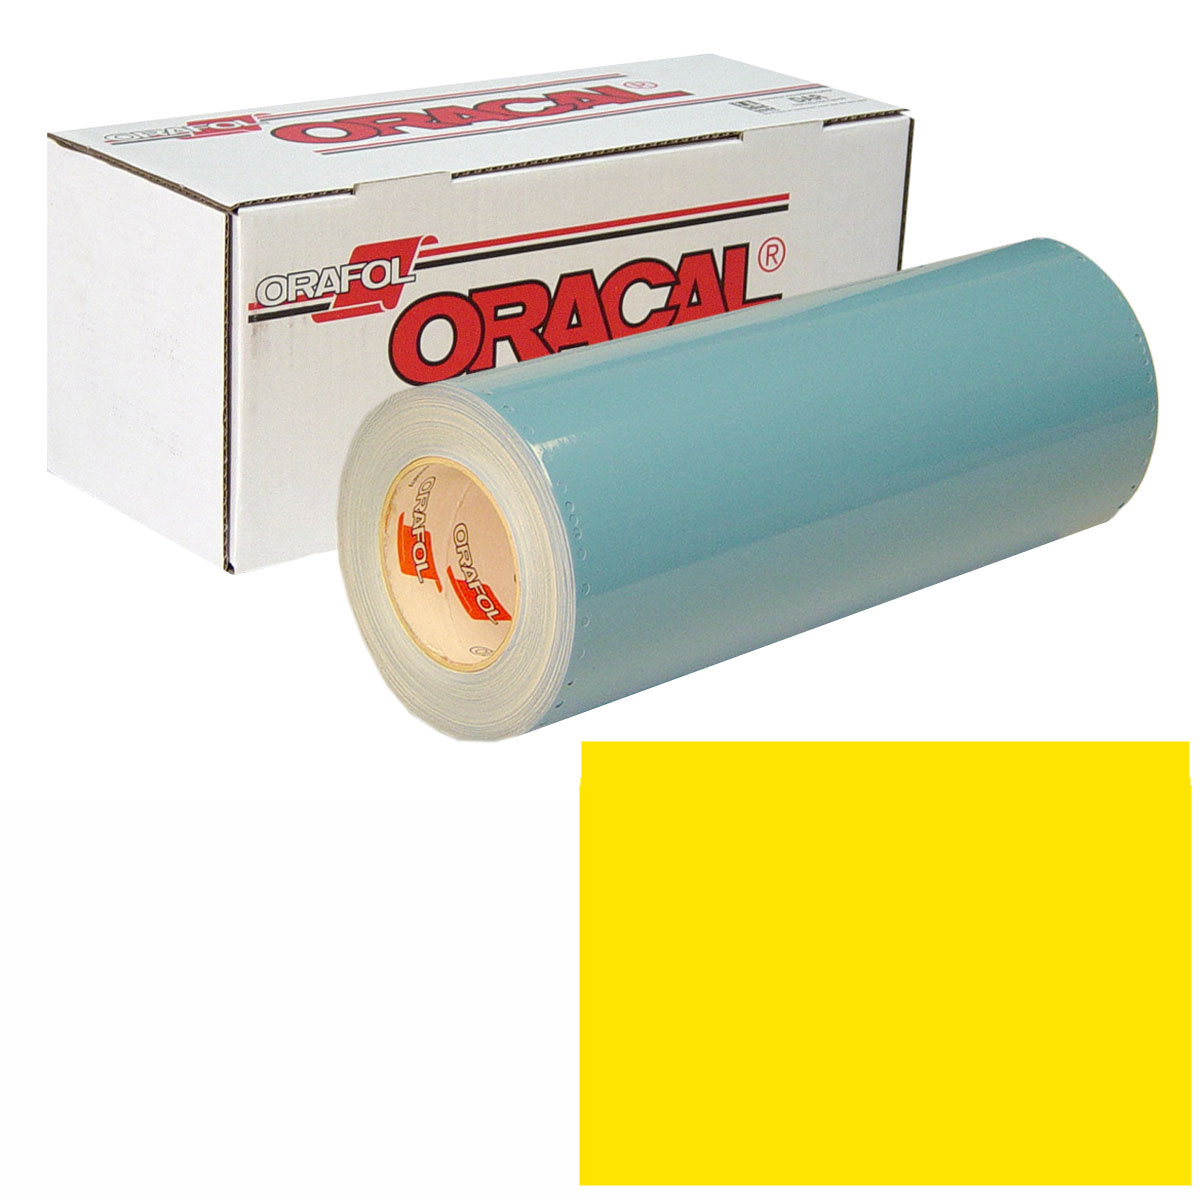 ORACAL 751 30in X 10yd 022 Light Yellow